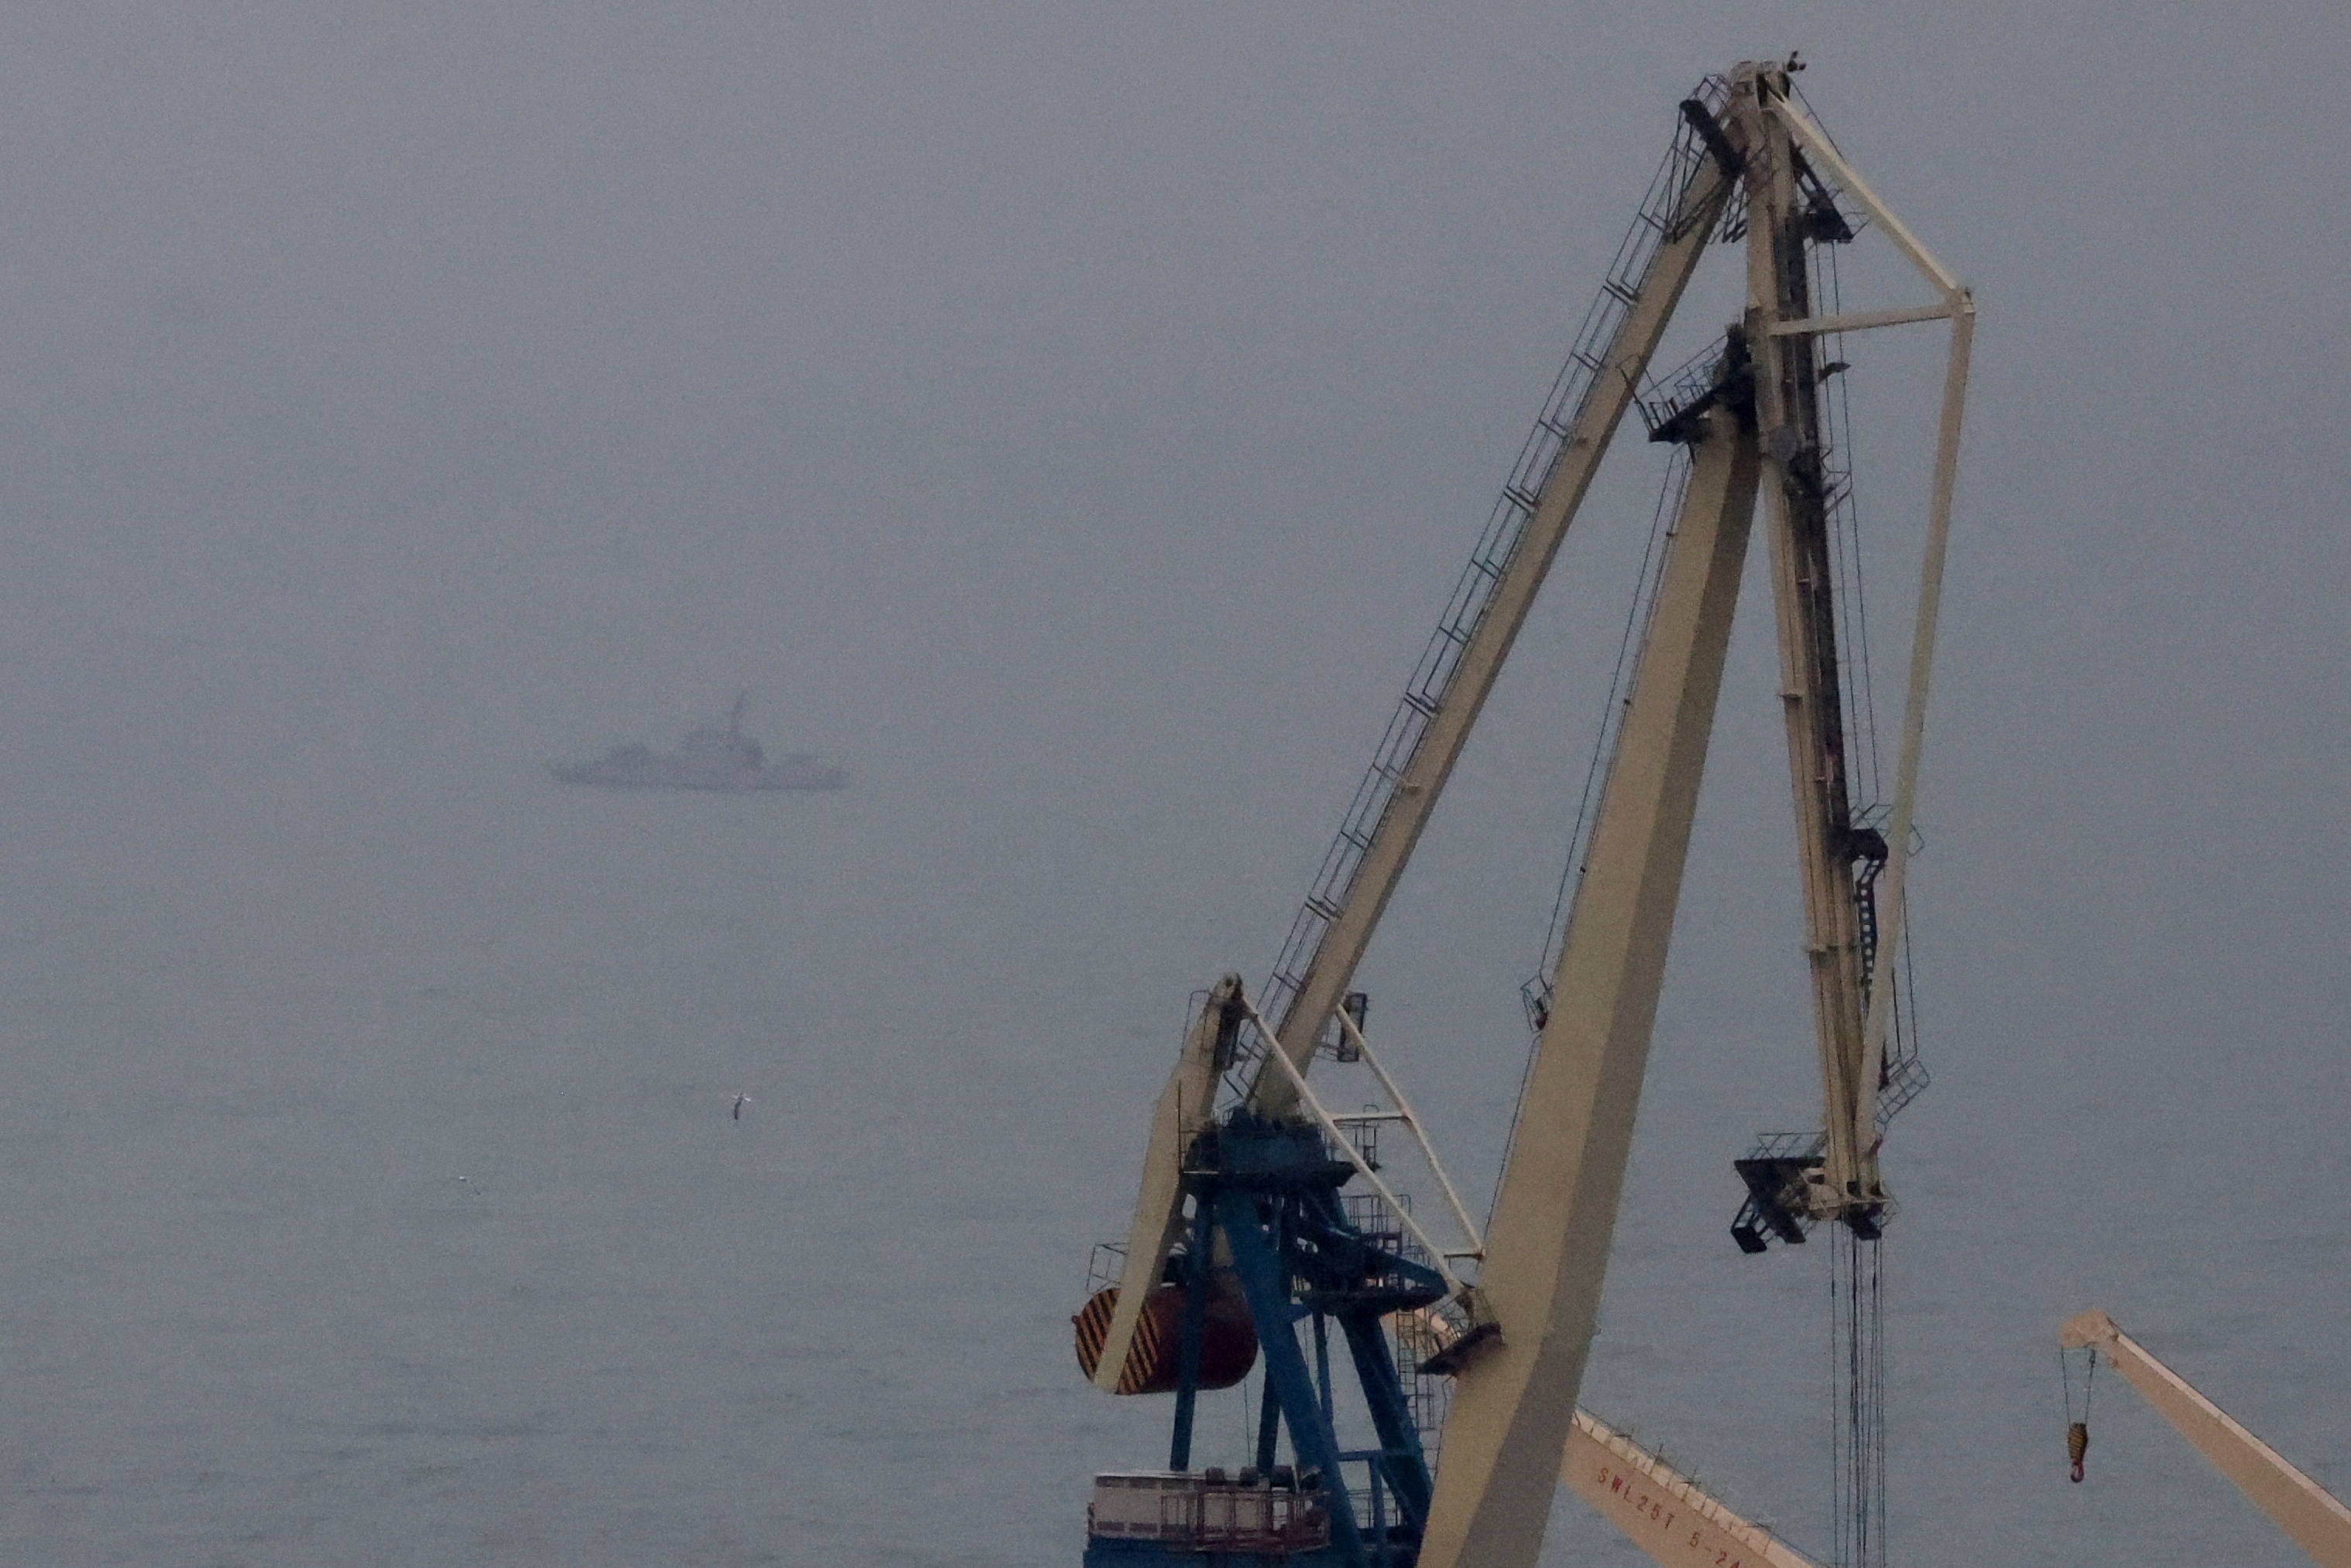 Ukrainian naval vessel is seen patrolling the port of Mariupol after Russian President Vladimir Putin authorized a military operation in eastern Ukraine